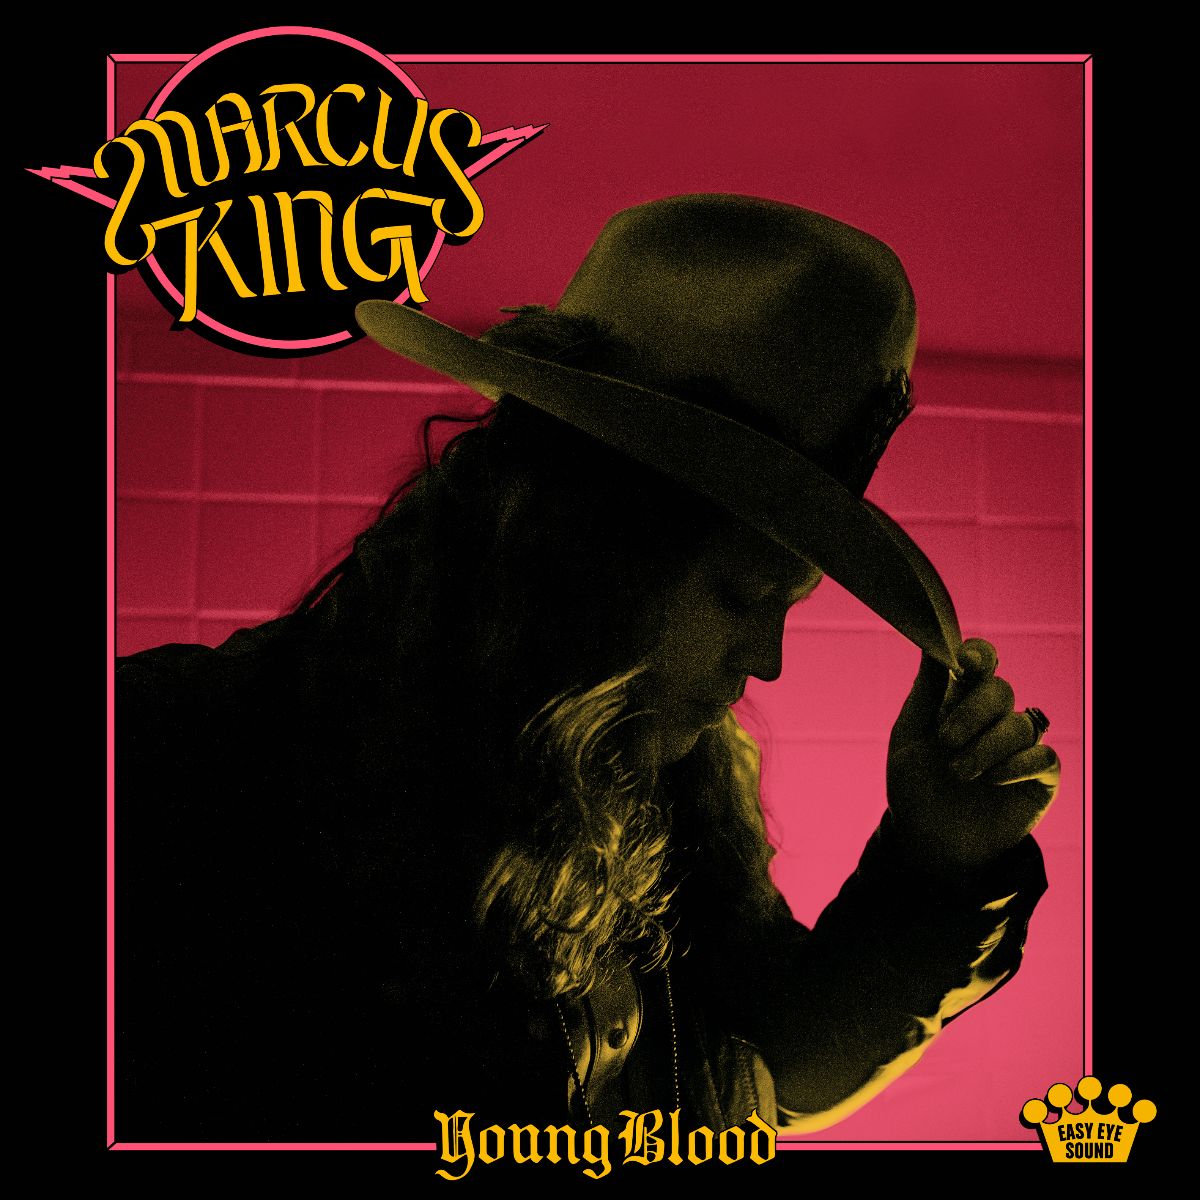 Marcus King releases new single 'Blood On The Tracks'